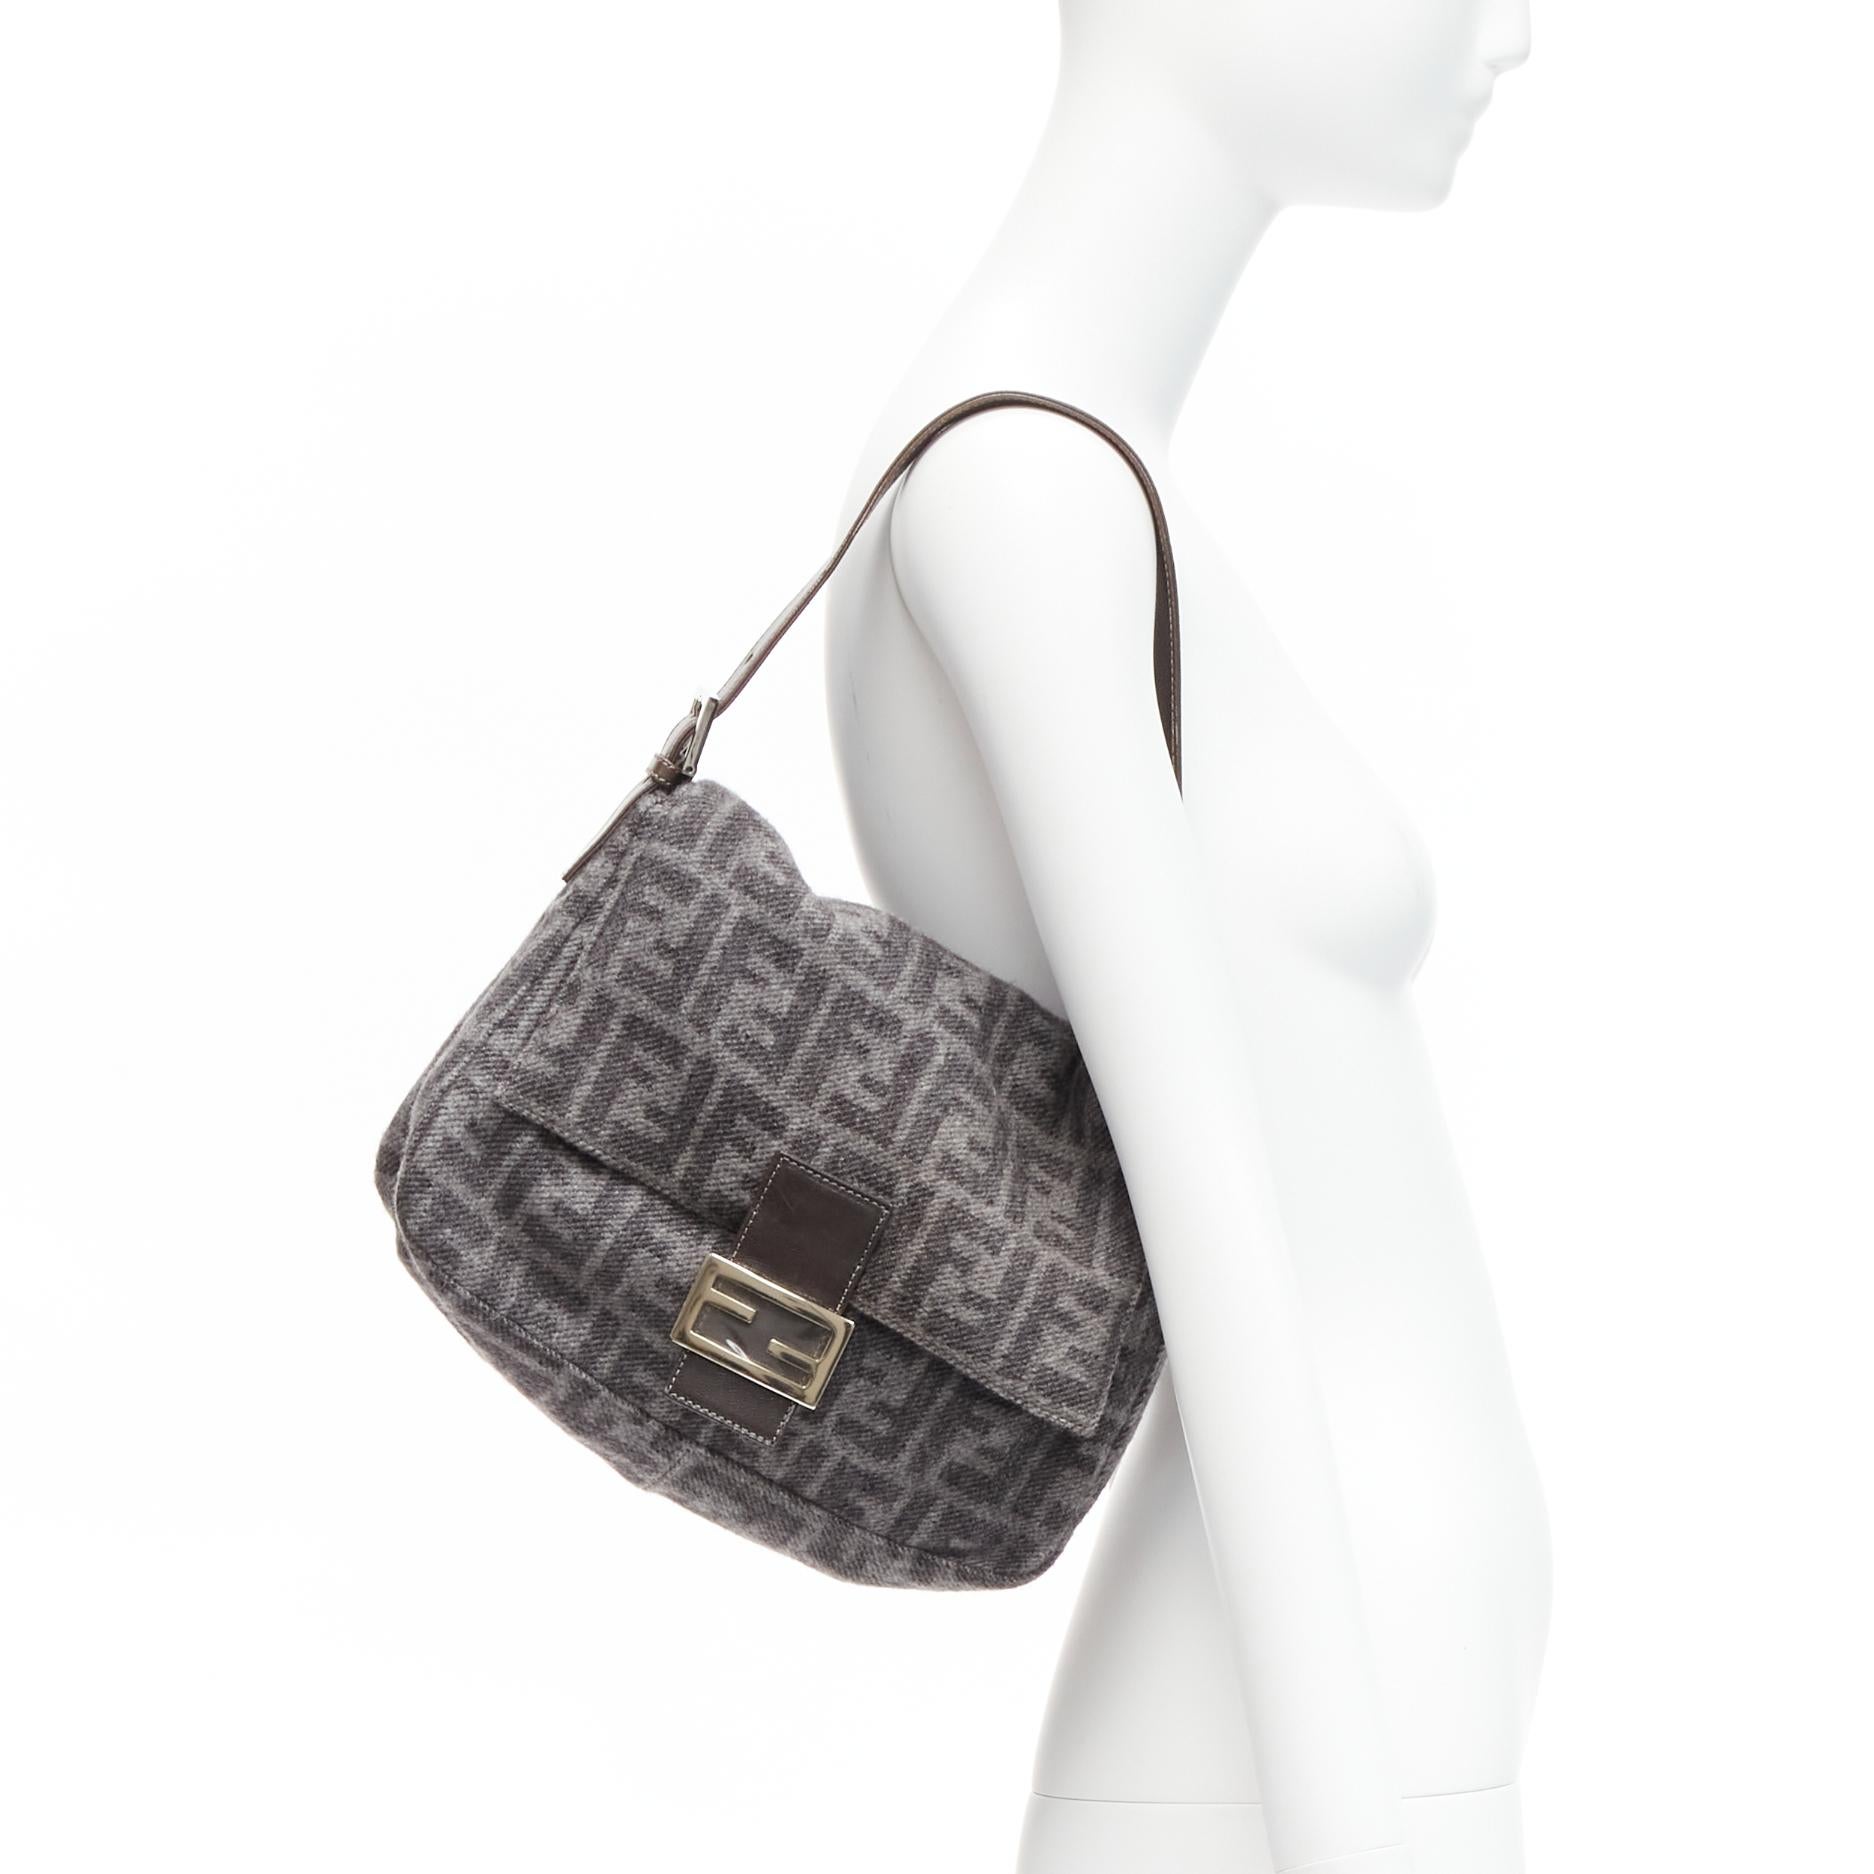 vintage FENDI Baguette FF buckle grey wool logo Zucca monogram underarm flap bag
Reference: TGAS/D00392
Brand: Fendi
Model: Baguette
Material: Wool, Leather, Metal
Color: Grey, Brown
Pattern: Monogram
Closure: Snap Buttons
Lining: Grey Fabric
Extra